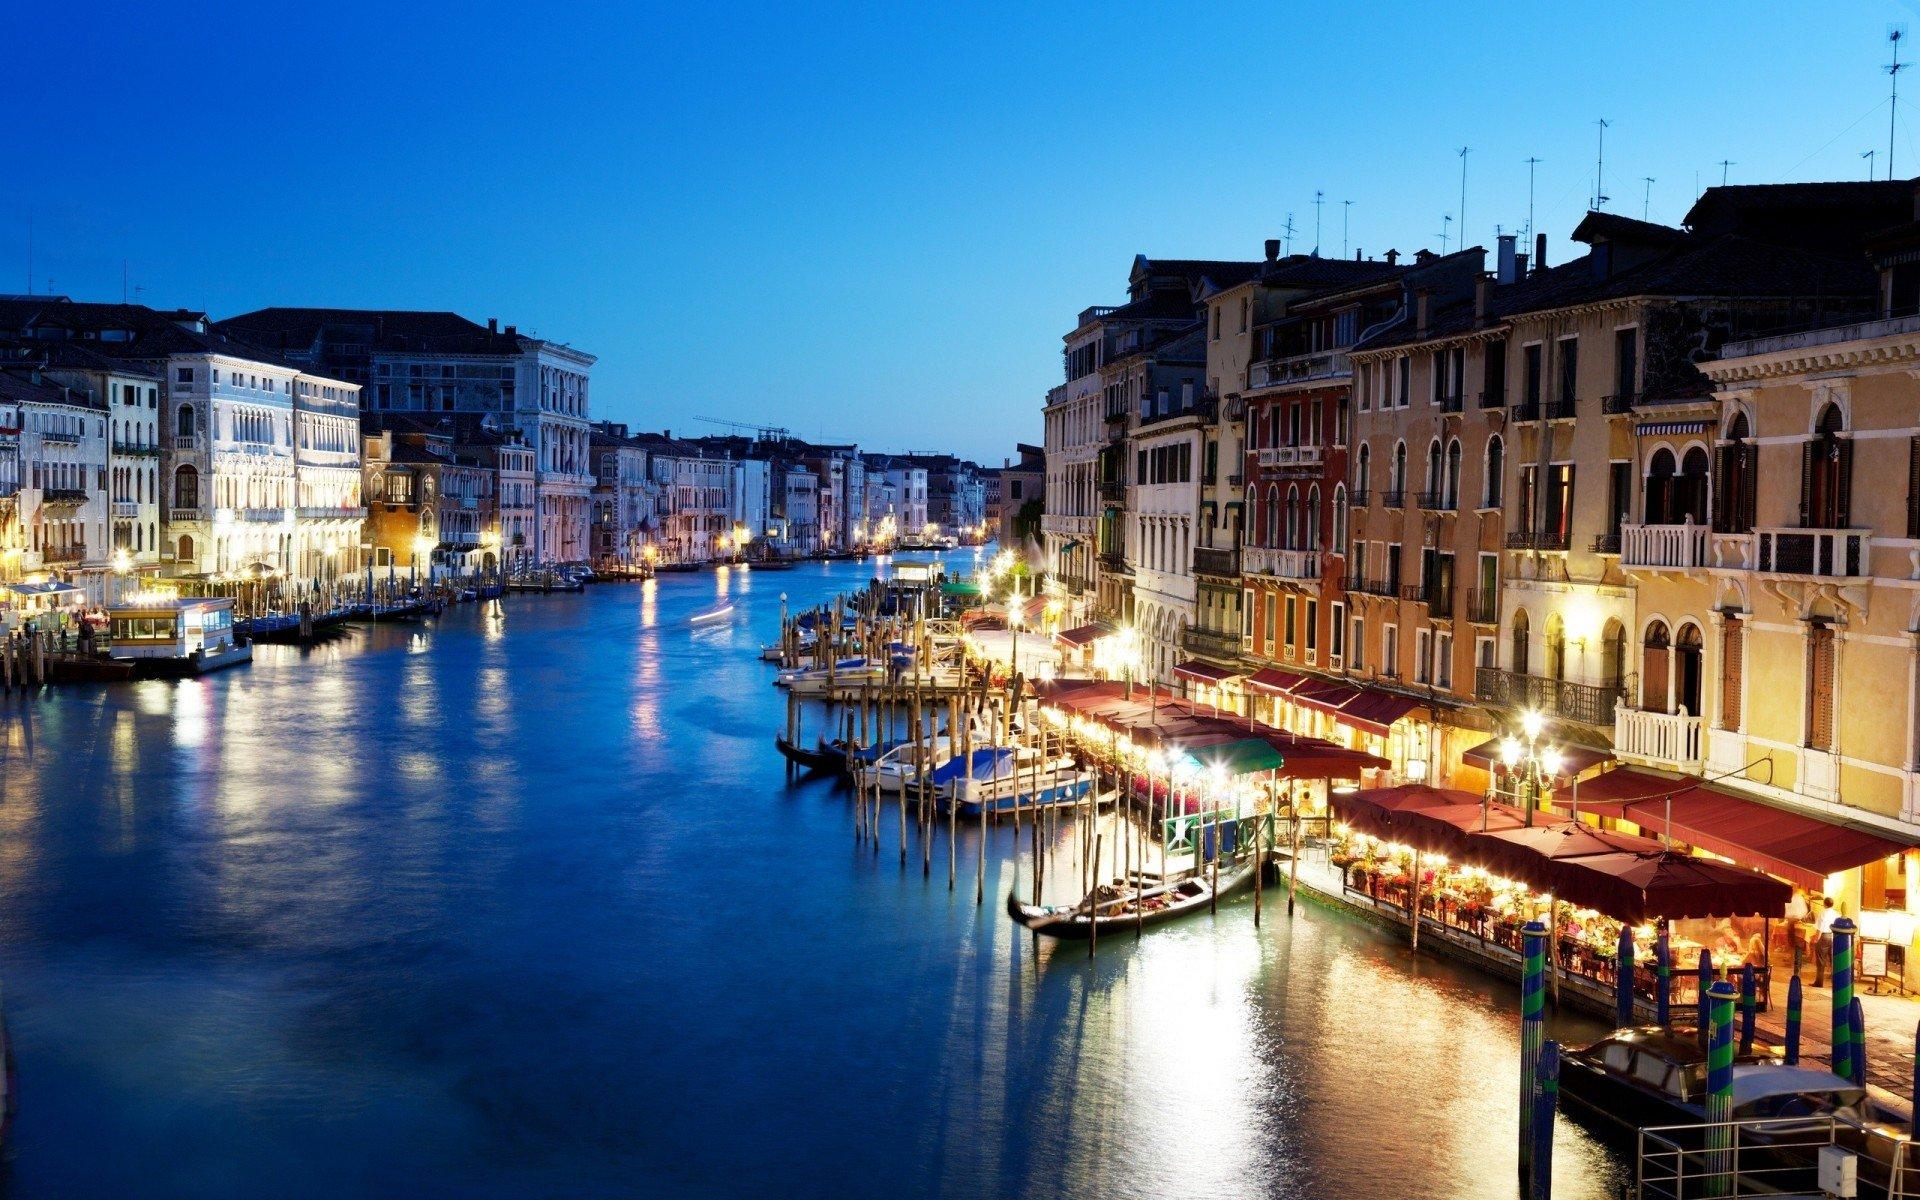 italy grand canal venice night canal grande HD wallpapers